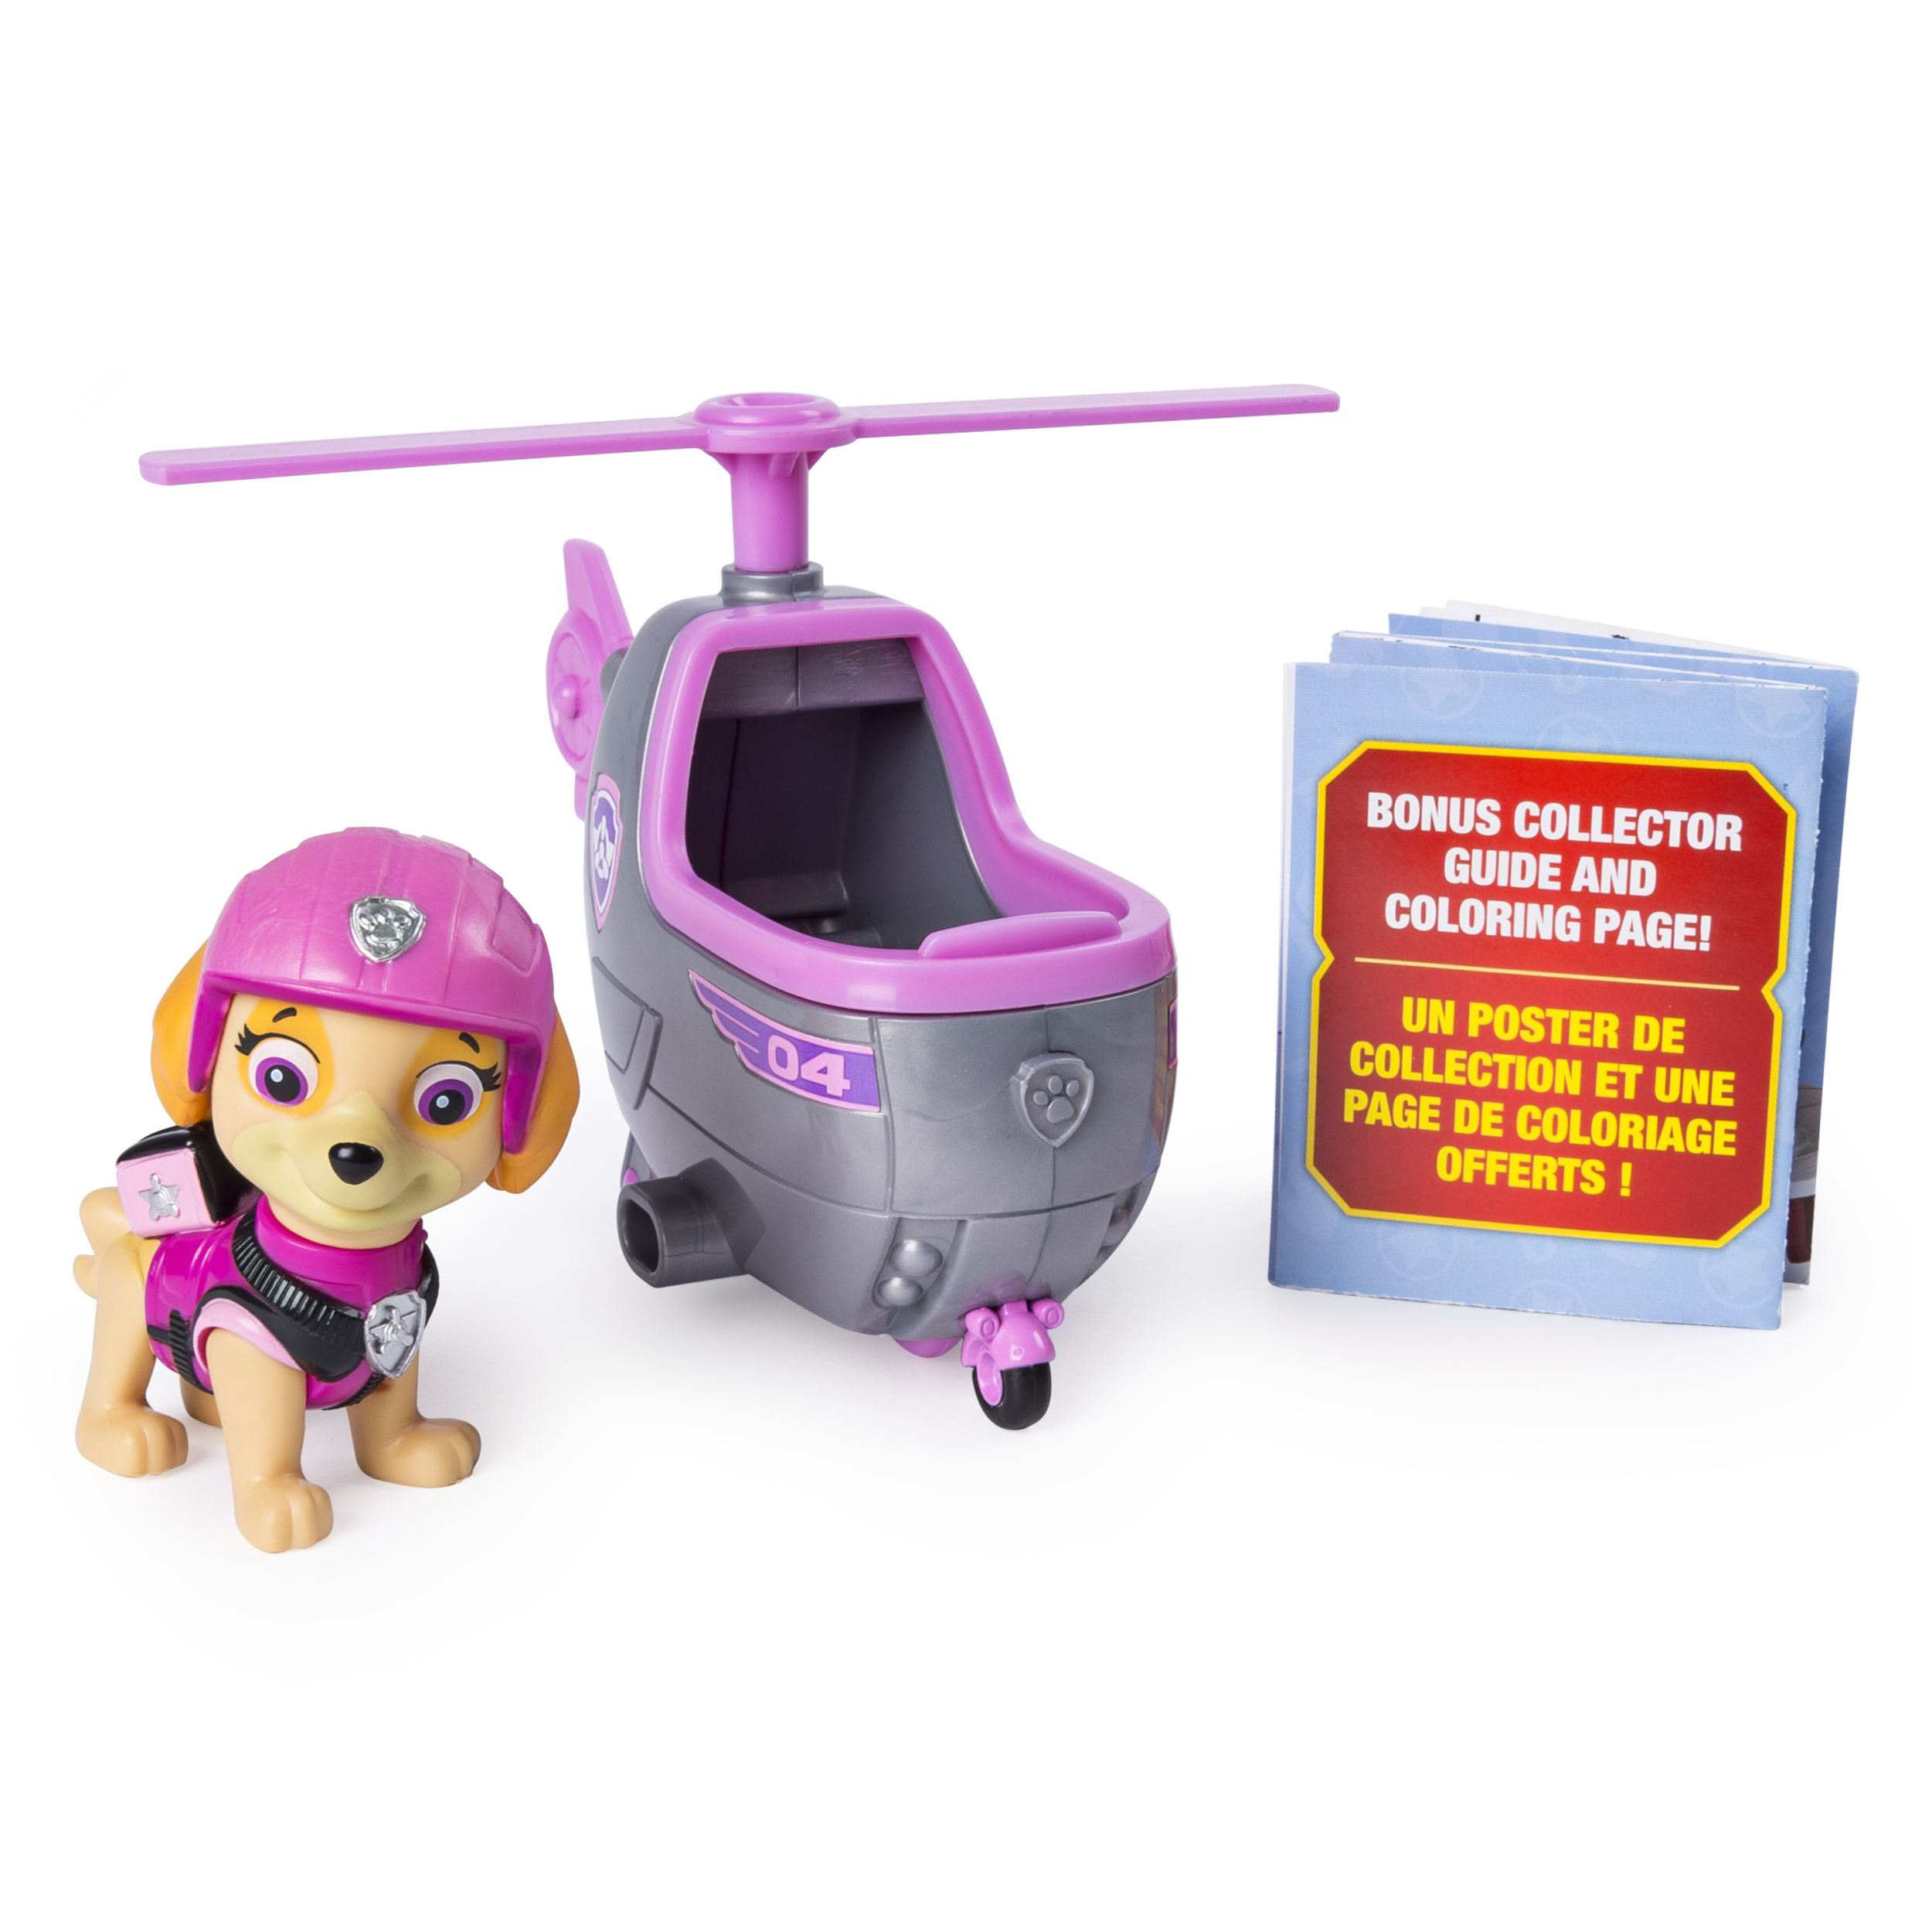 PAW Patrol Ultimate Rescue, Skye’s Mini Helicopter with Collectible Figure, for Ages 3 and Up - image 1 of 6